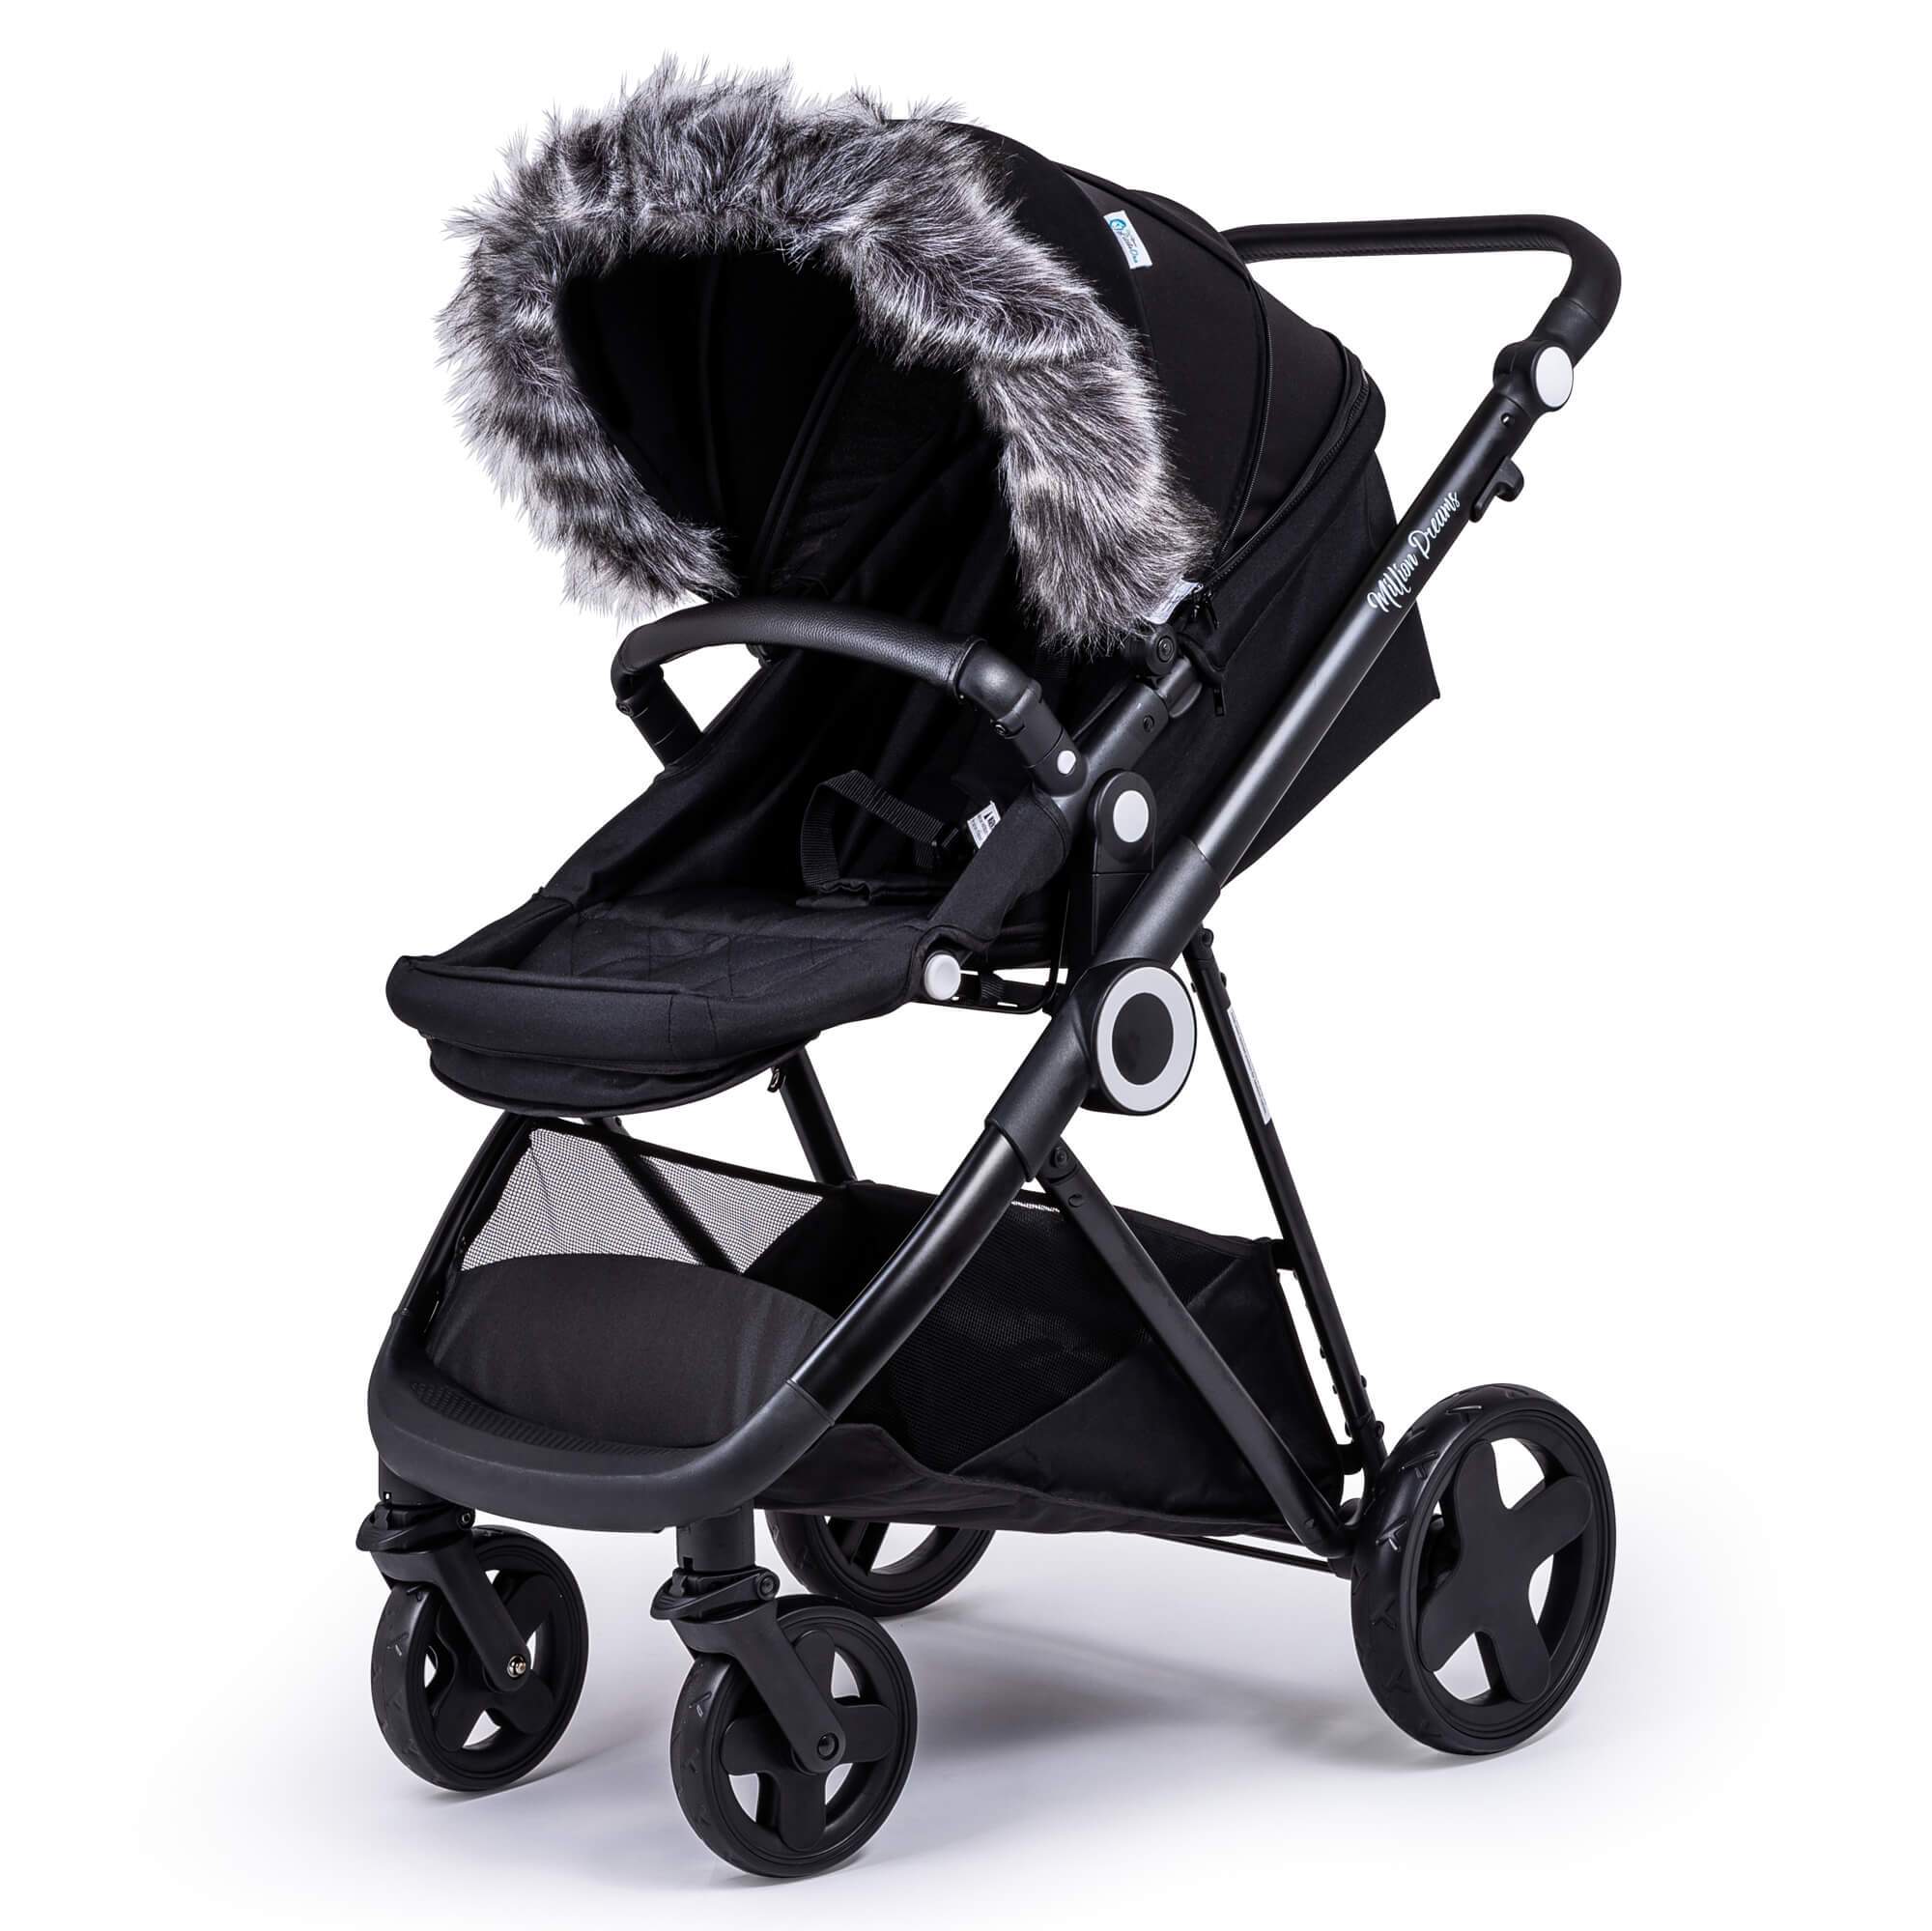 Pram Fur Hood Trim Attachment for Pushchair Compatible with Emmaljunga - Dark Grey / Fits All Models | For Your Little One